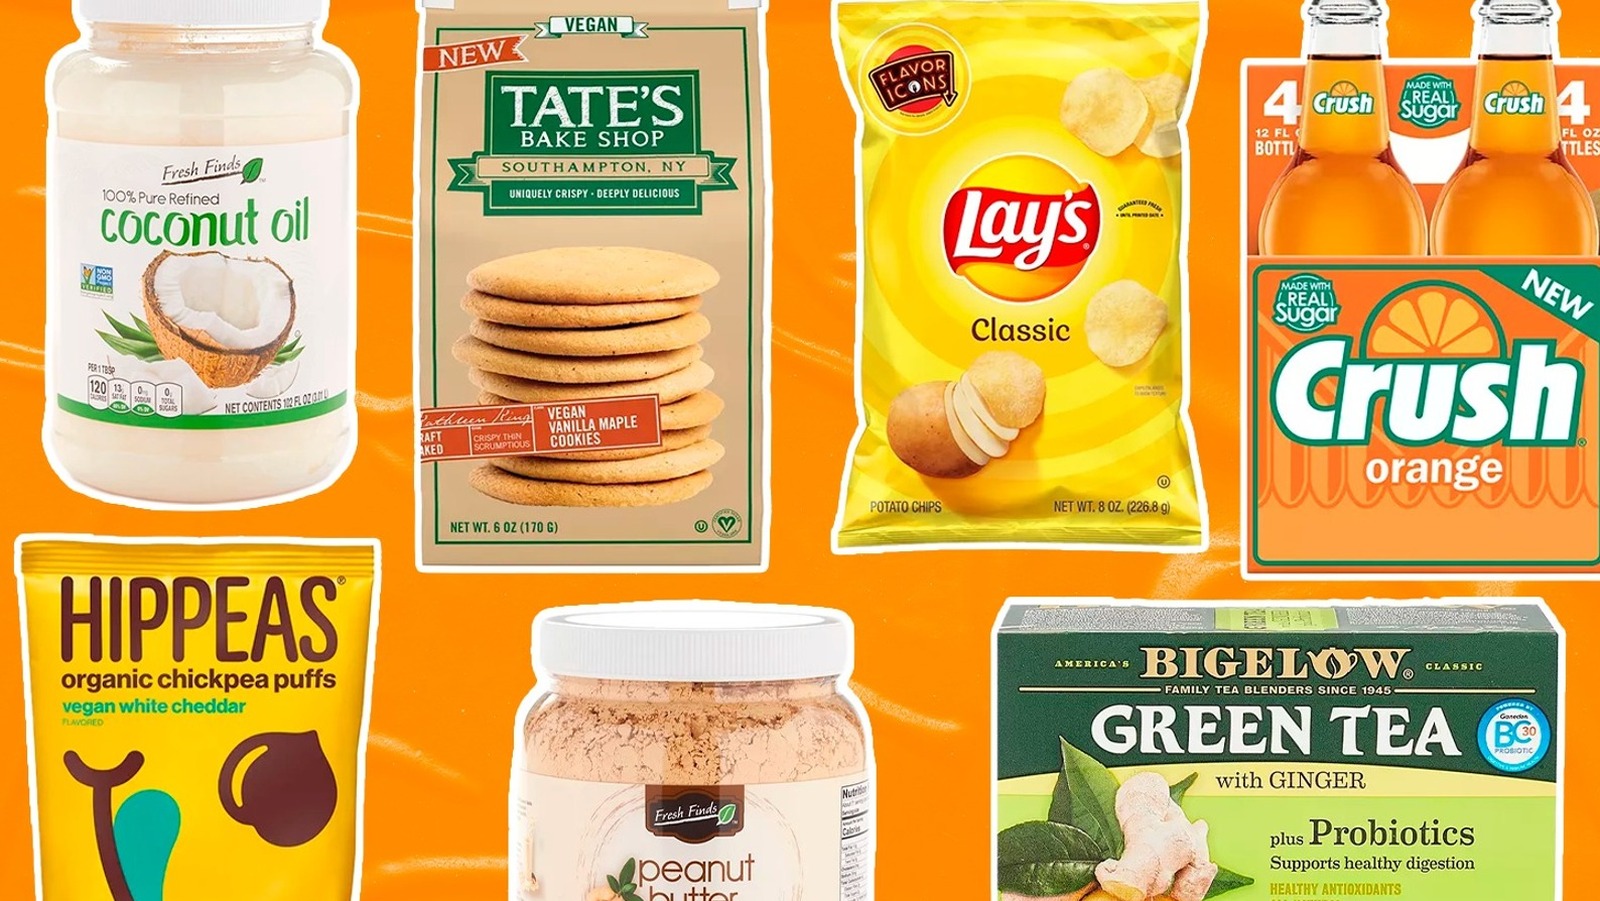 10 Groceries You Should Buy At Big Lots And 4 You Shouldn’t – Mashed